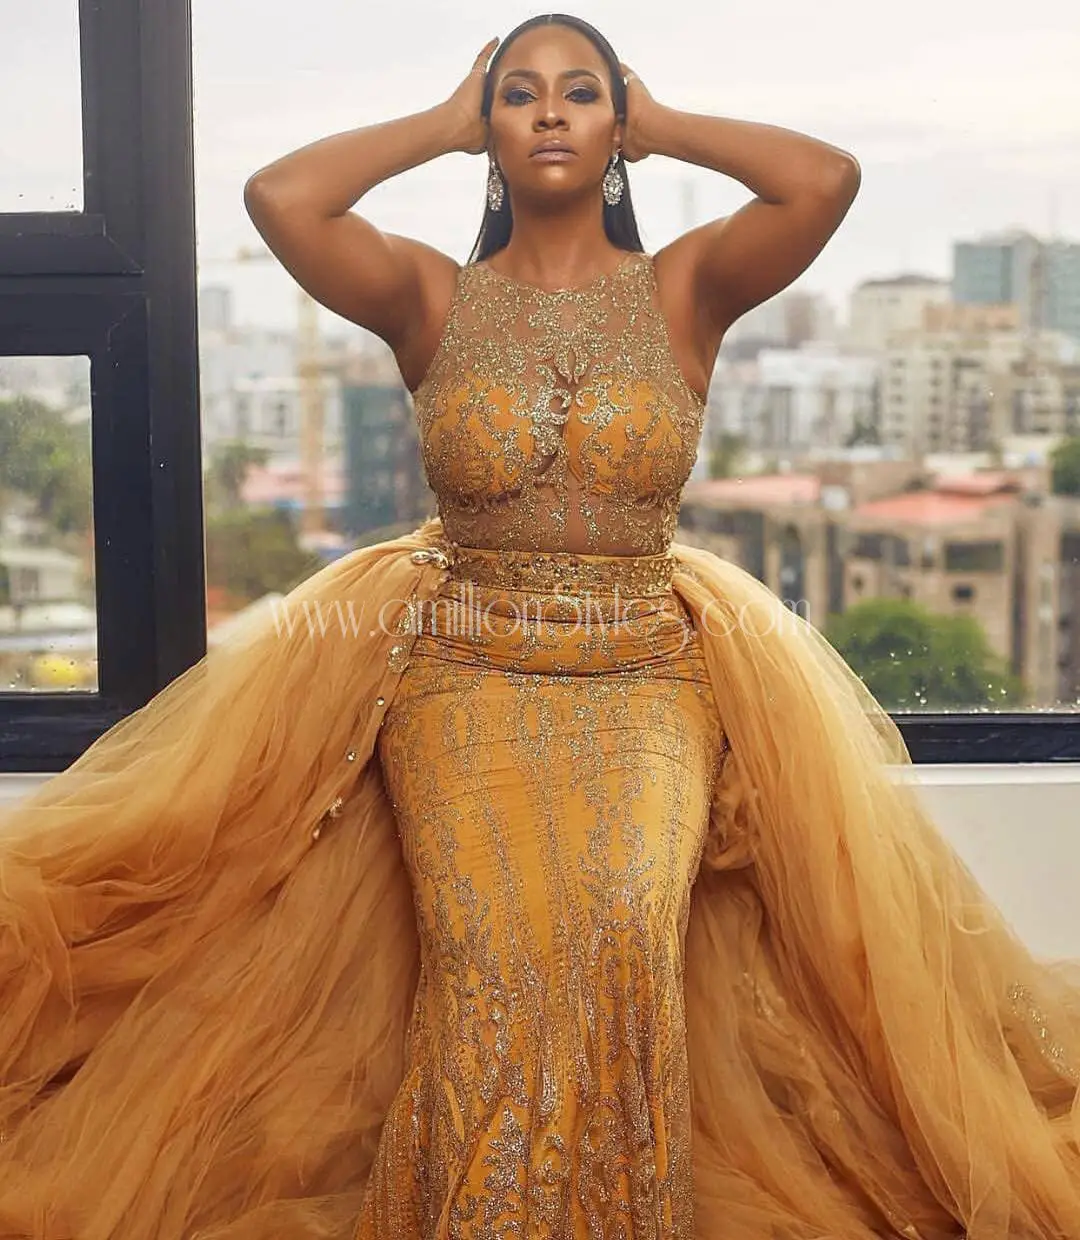 11 Lace Asoebi Outfits That Are Off The Chain!